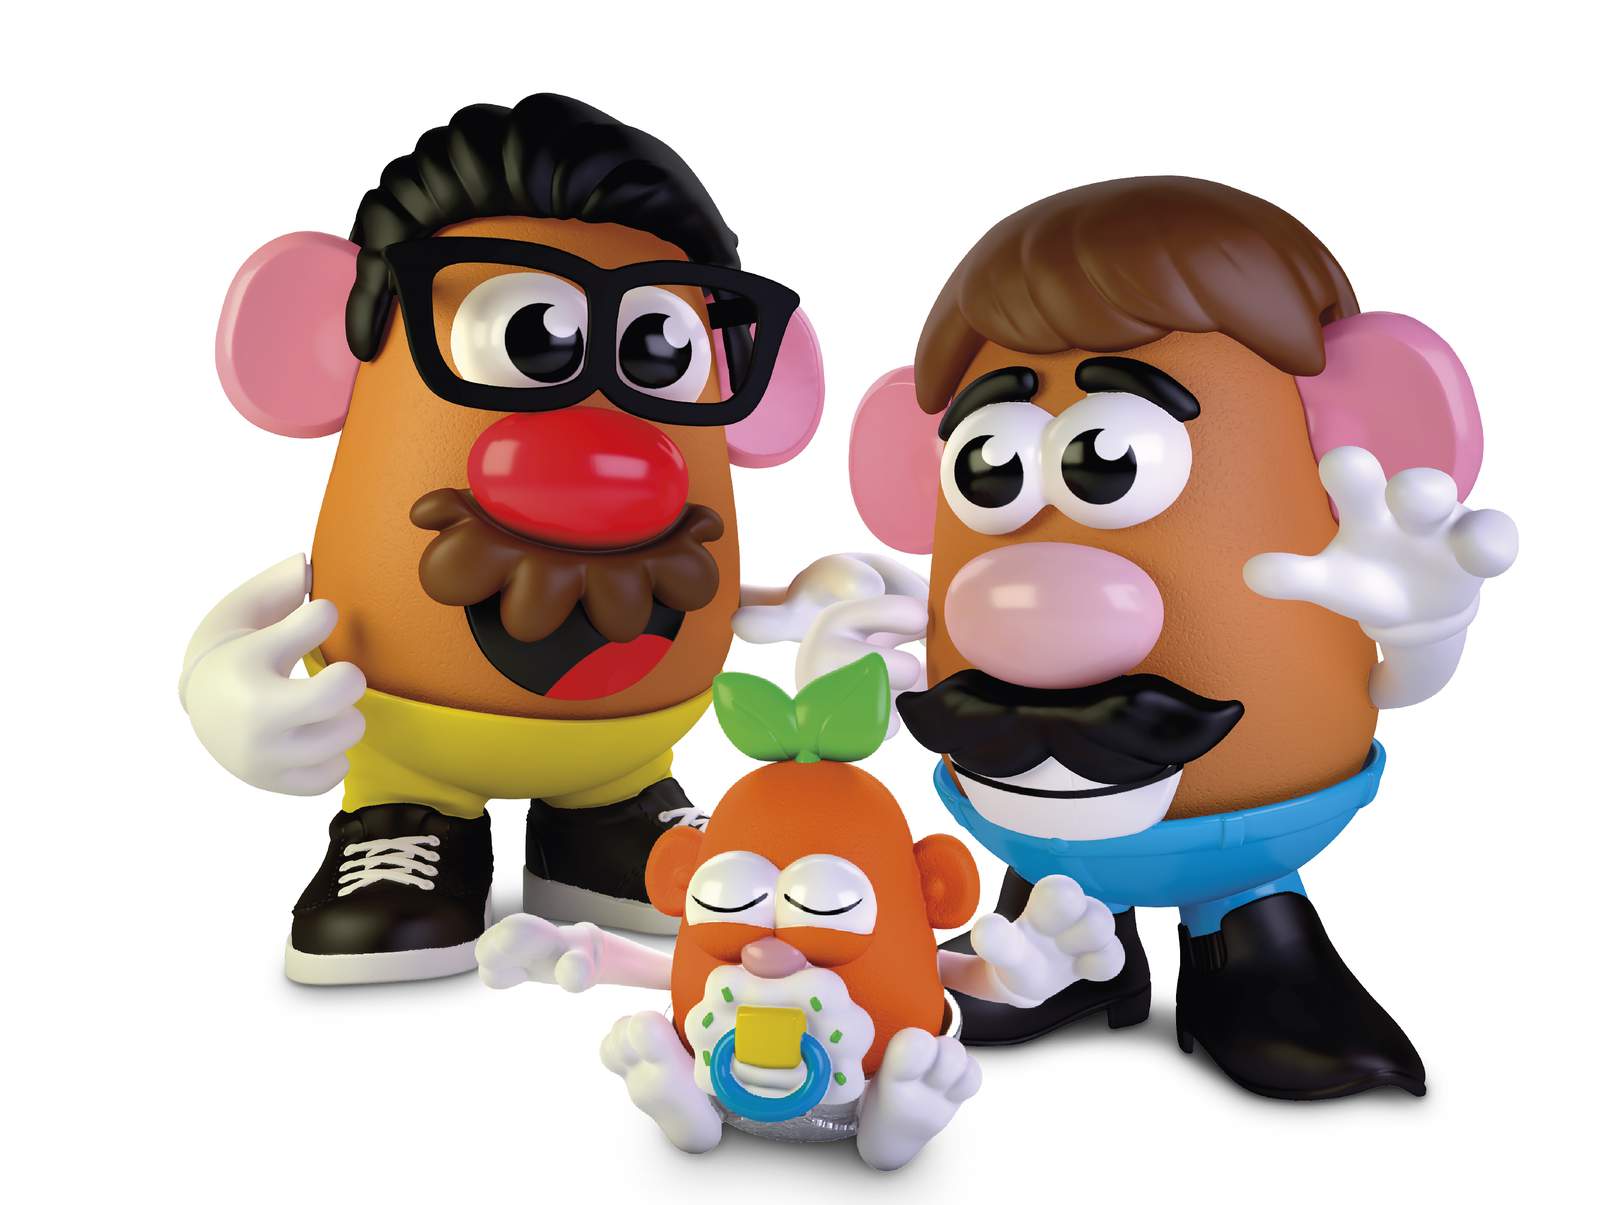 Hasbro dropping the ‘Mister’ from Mr. Potato Head, making toy gender neutral